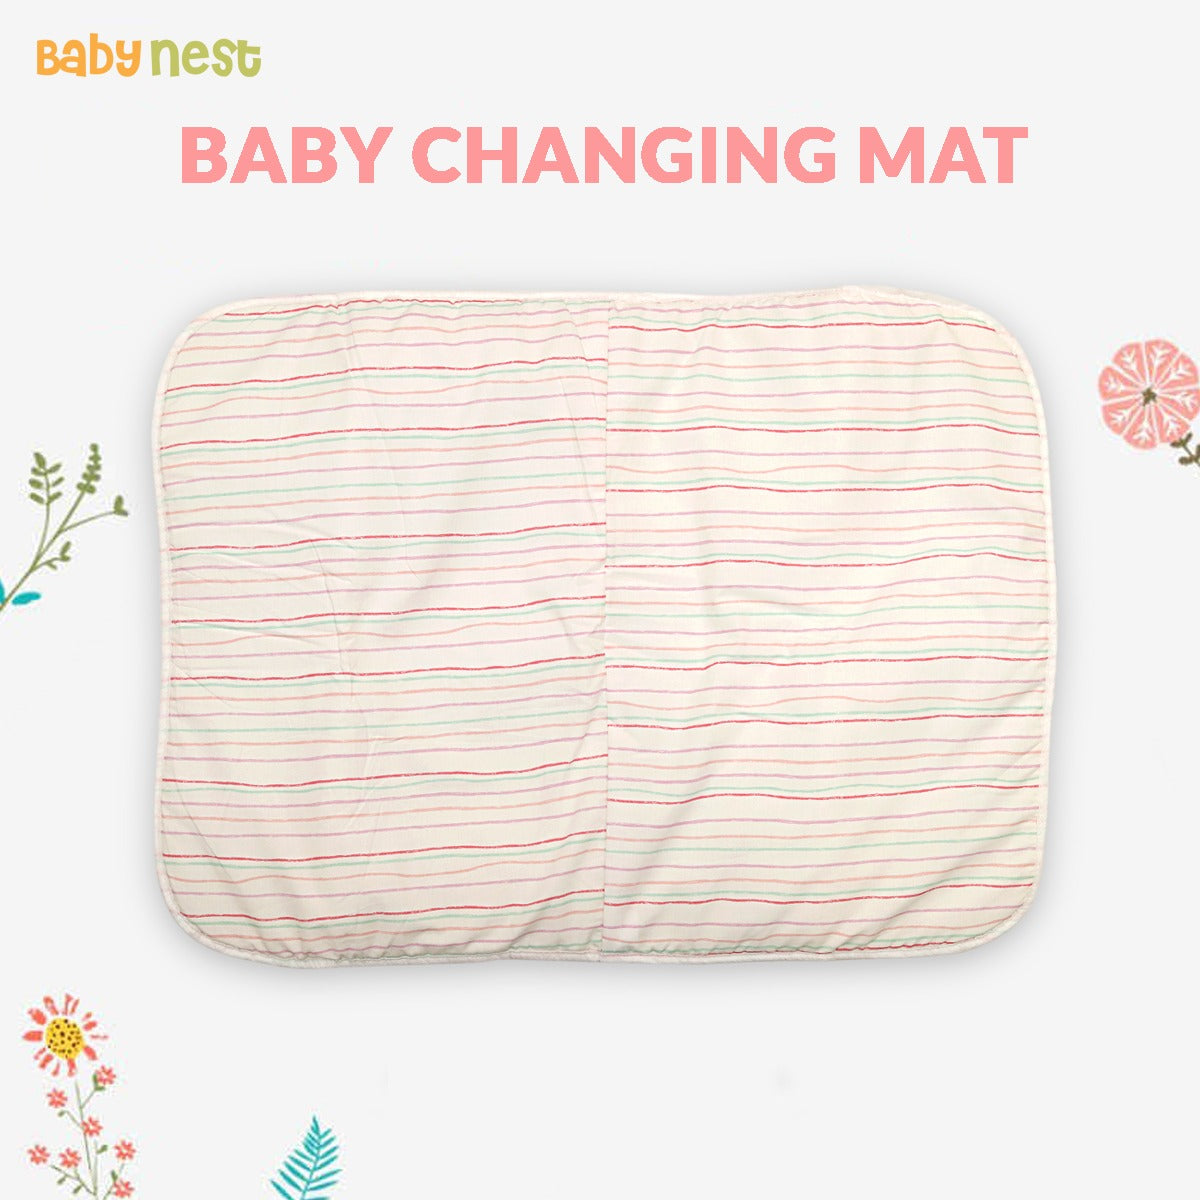 BNBCS- 21 - Changing Sheet for Kids (24L*17W Inches)